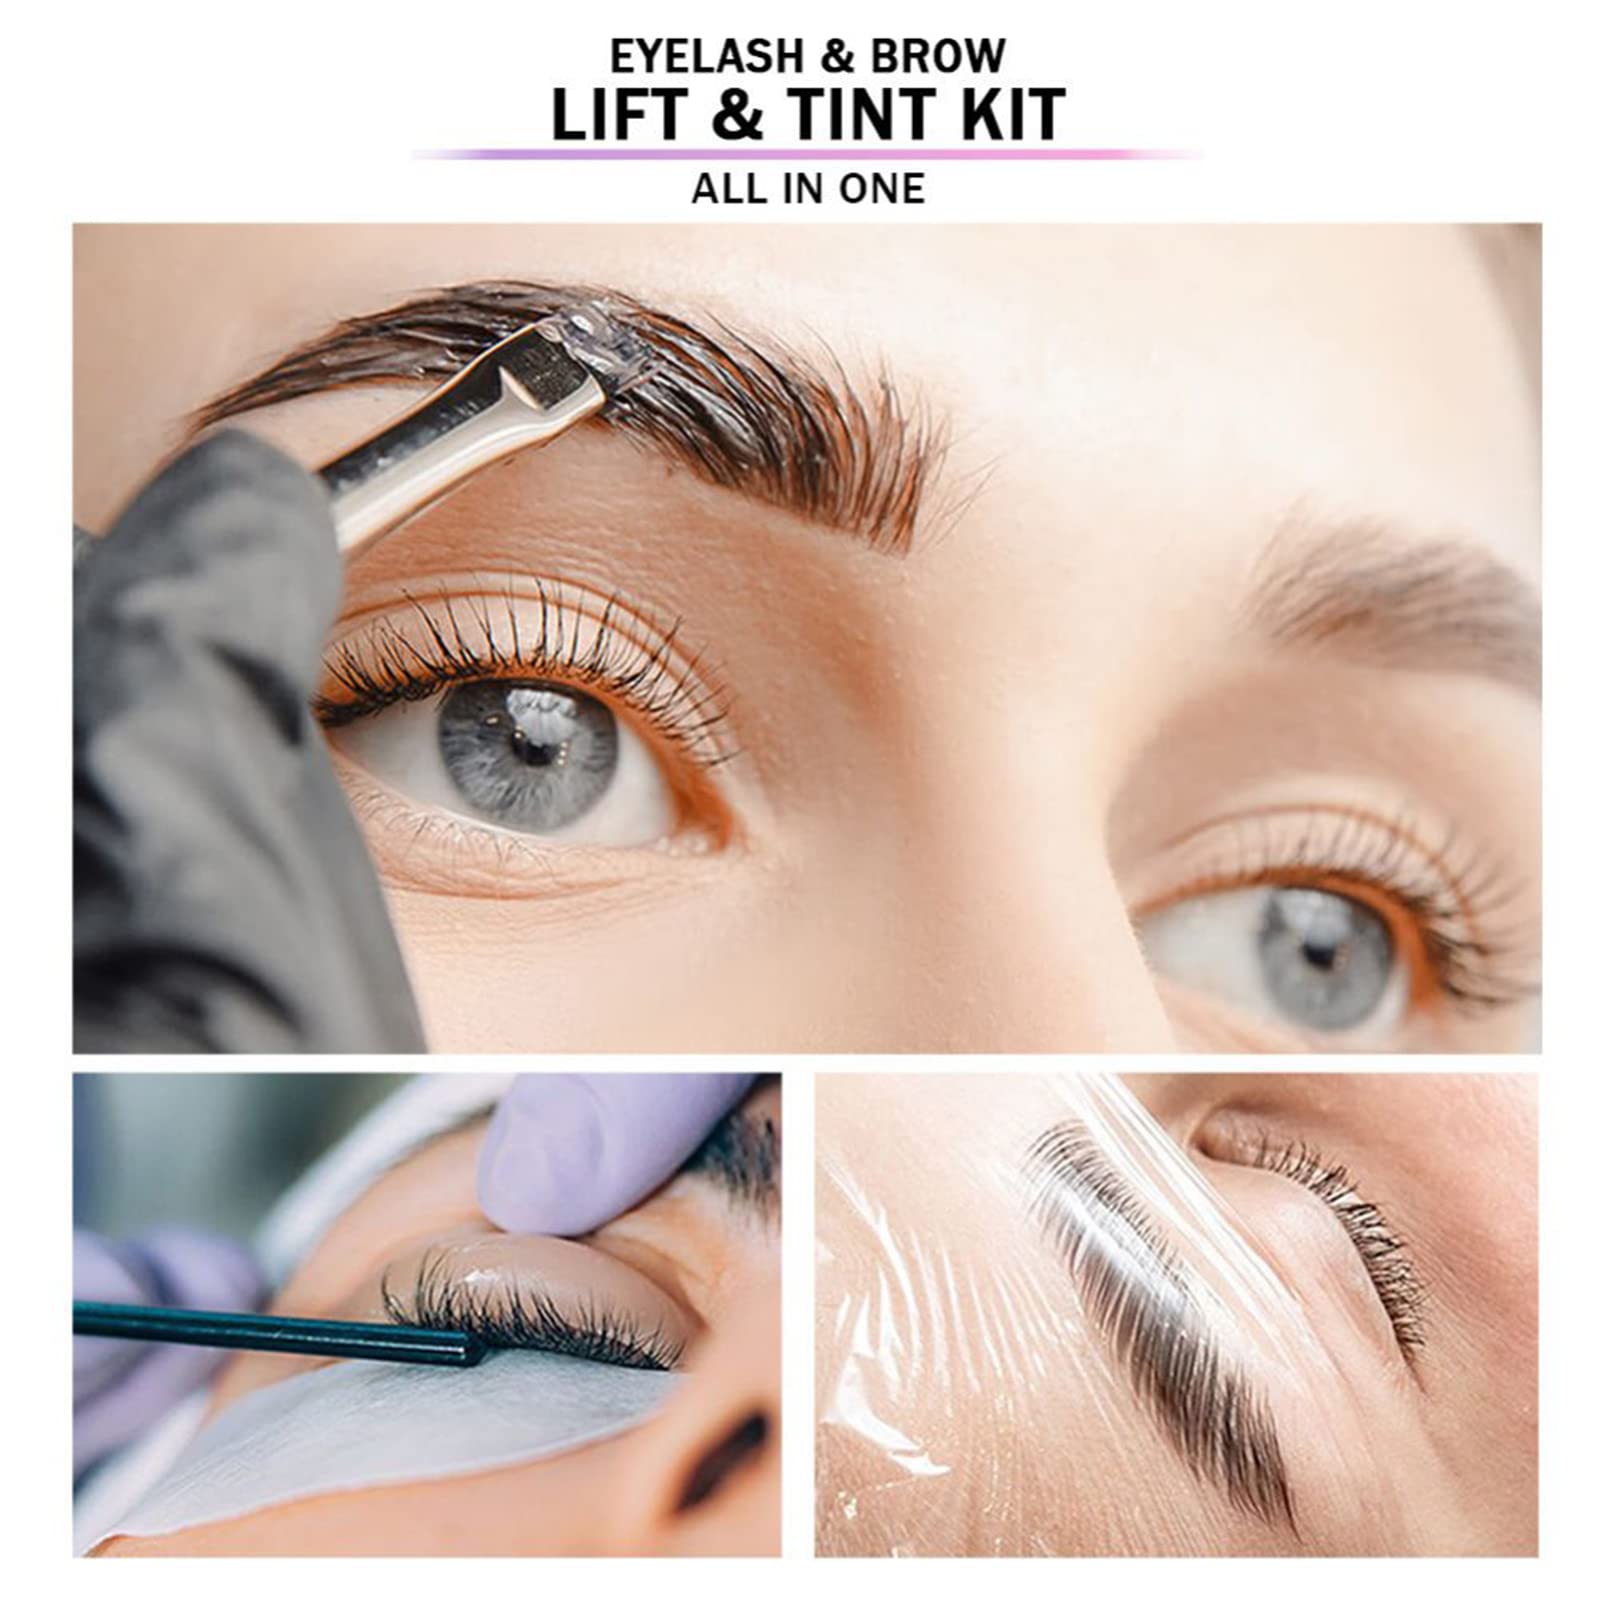 Brow Lamination and Tint Kit, 4 in 1 Lash Lift and Tint Kit, Professional Eyebrow & Eyelash Perm Kit with Black Dye, Fuller & Thicker Brows Long-lasting for 6-8 Weeks, Suitable for Salon & Home Use